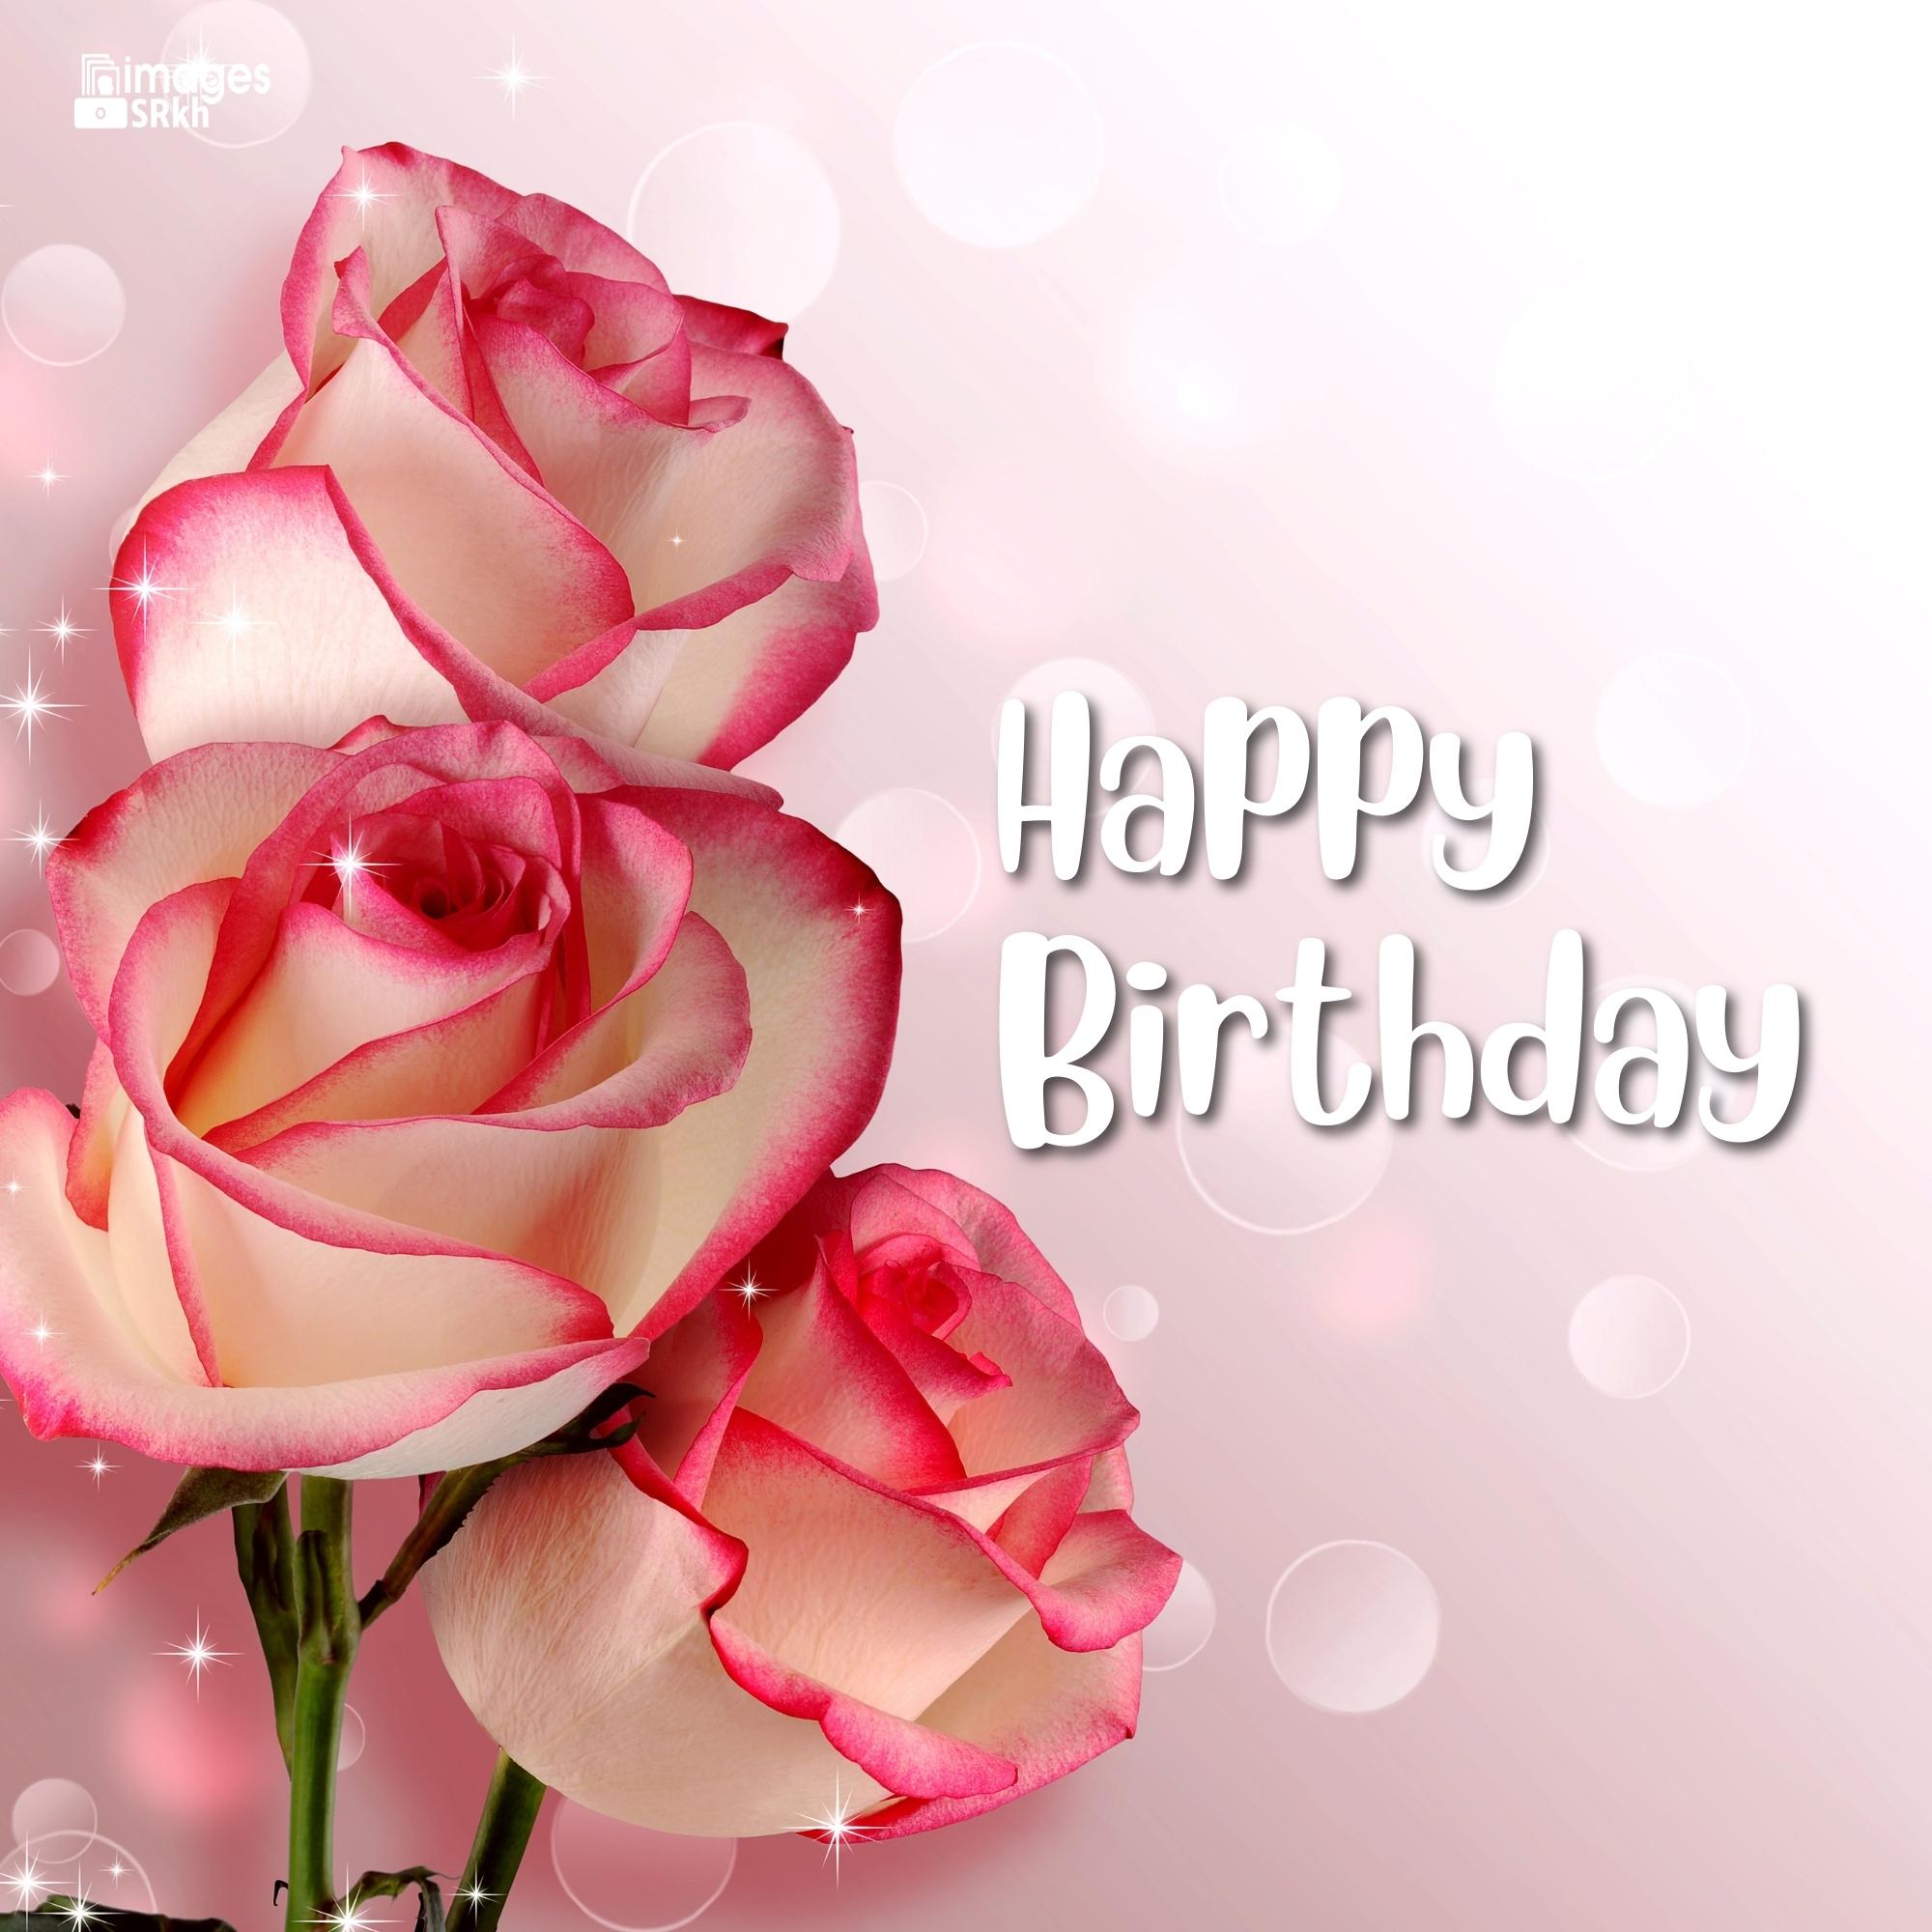 🔥 Beautiful Happy Birthday Images full hd download Download free - Images  SRkh